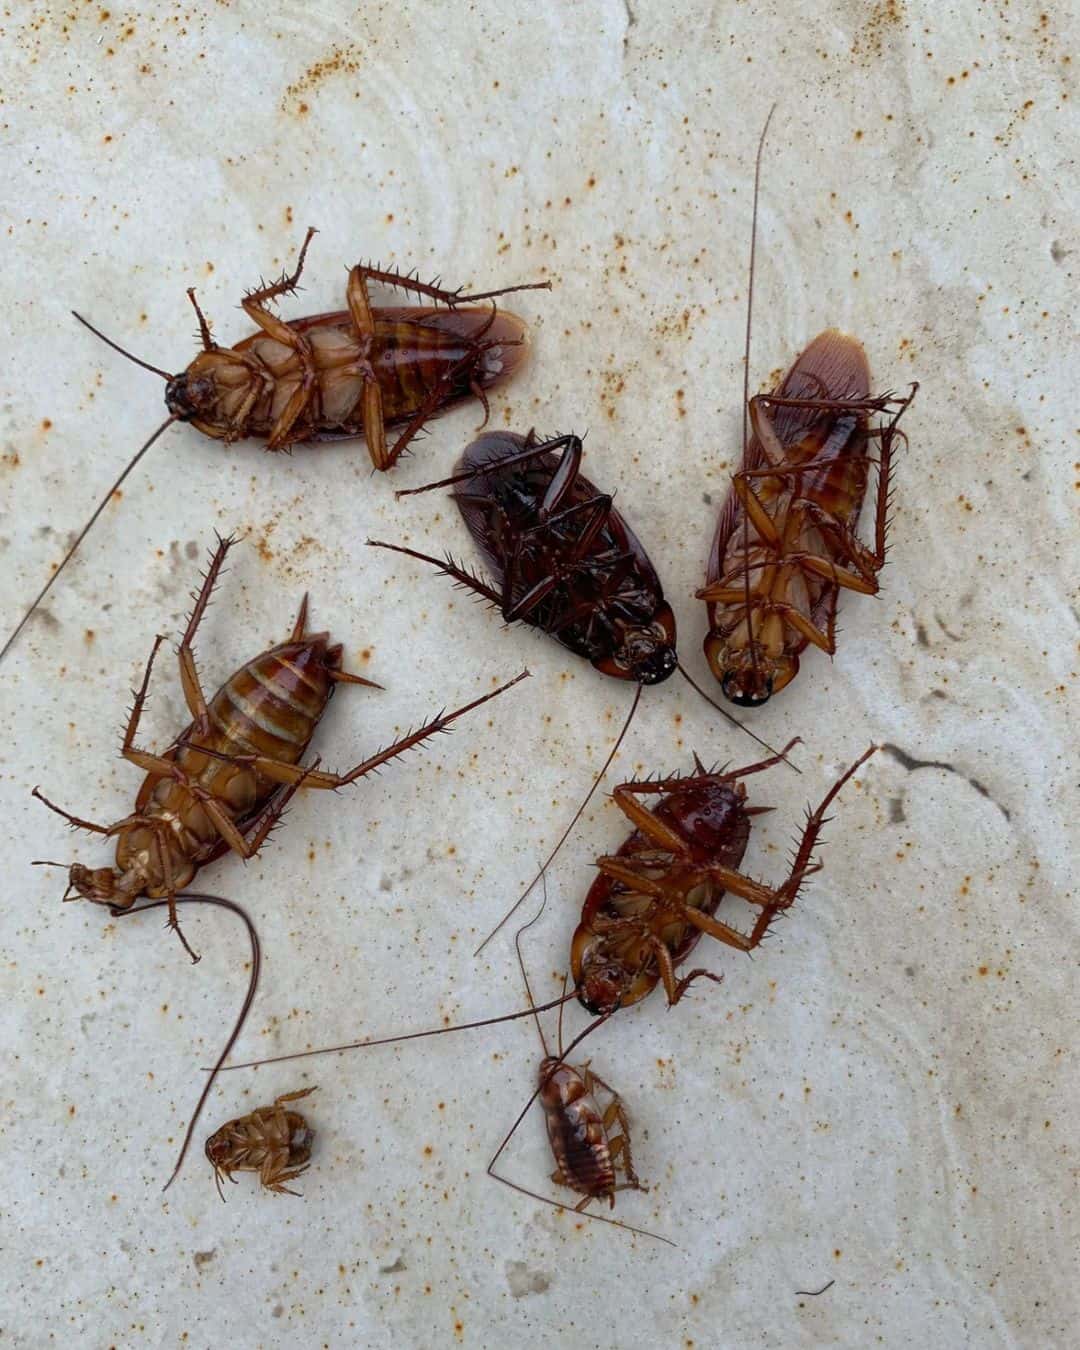 How-to-Clean-Up-After-Dead-Cockroaches1